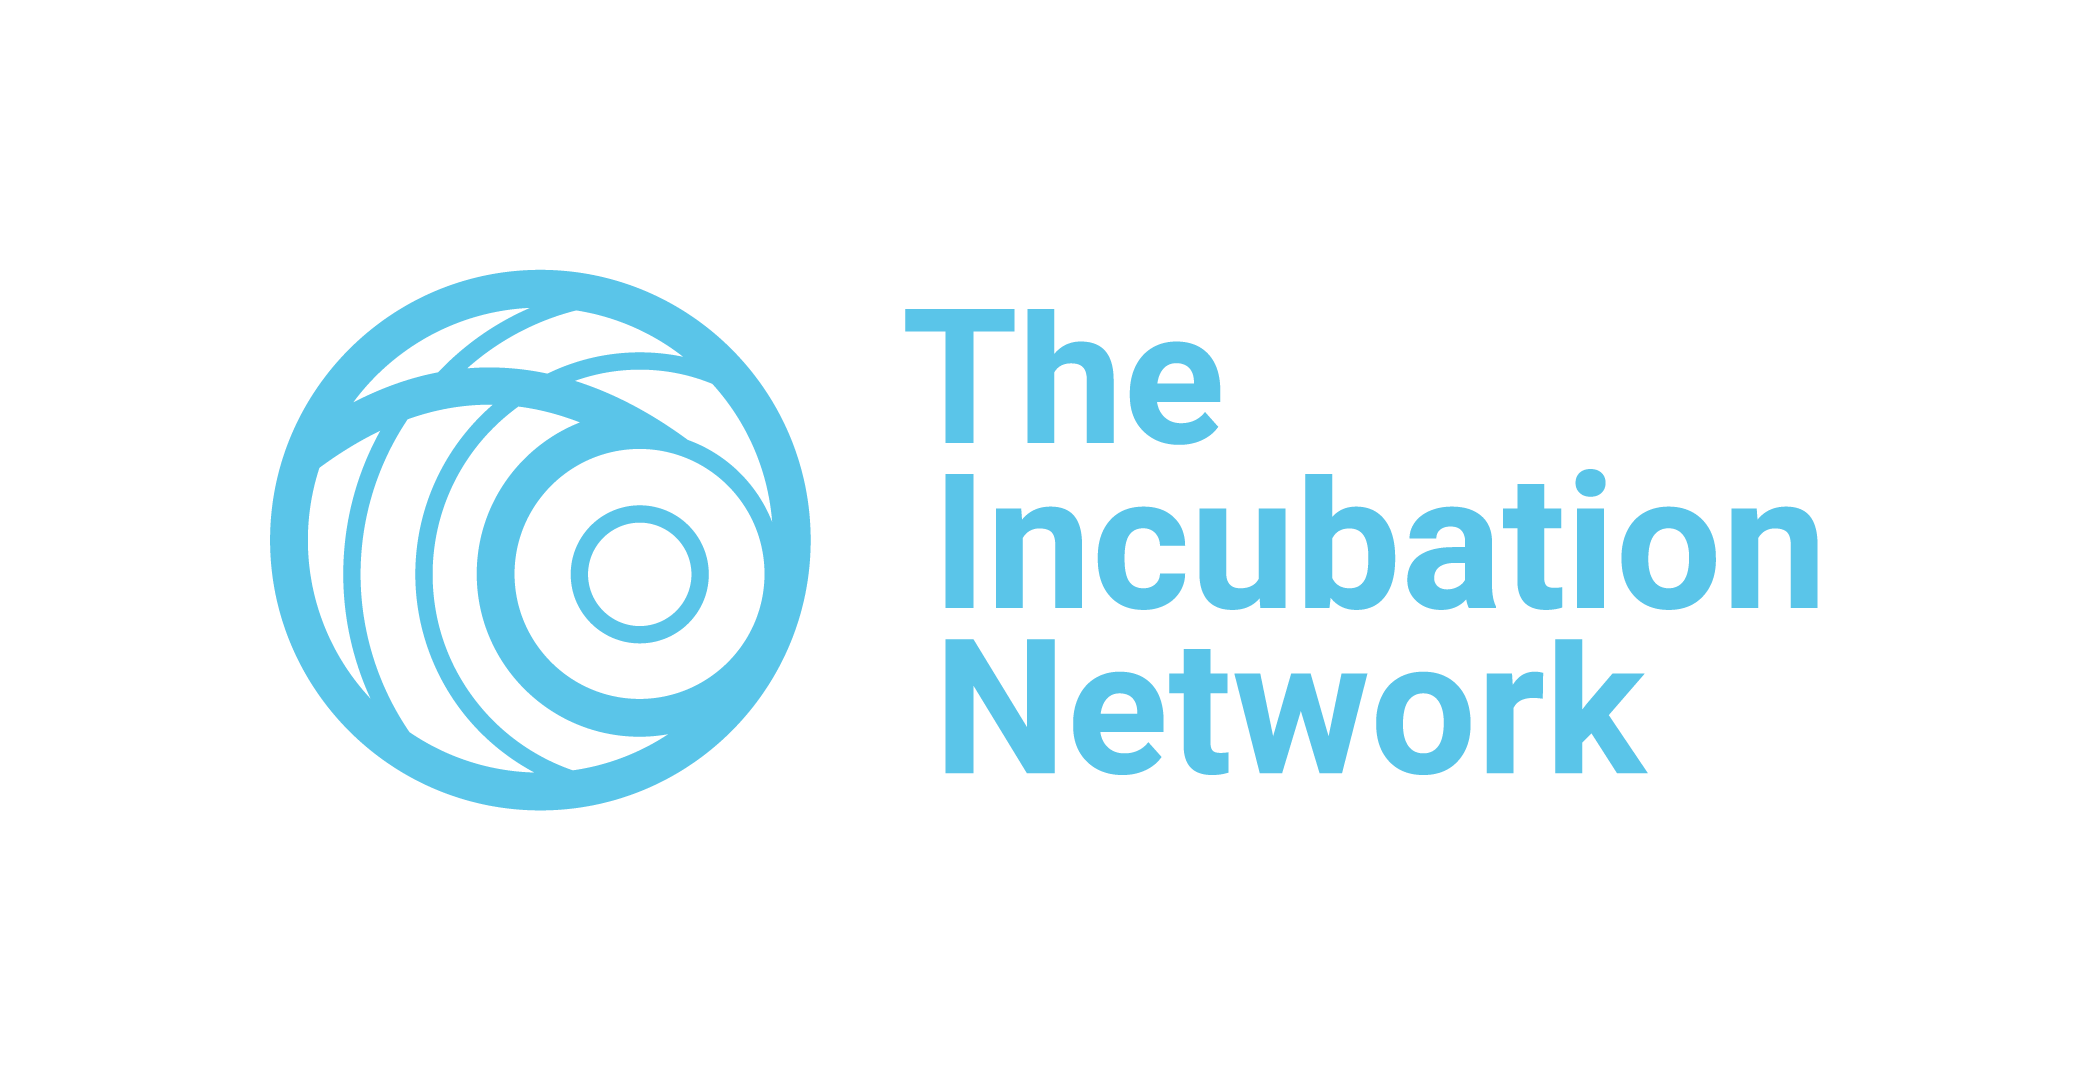 The Incubation Network's logo